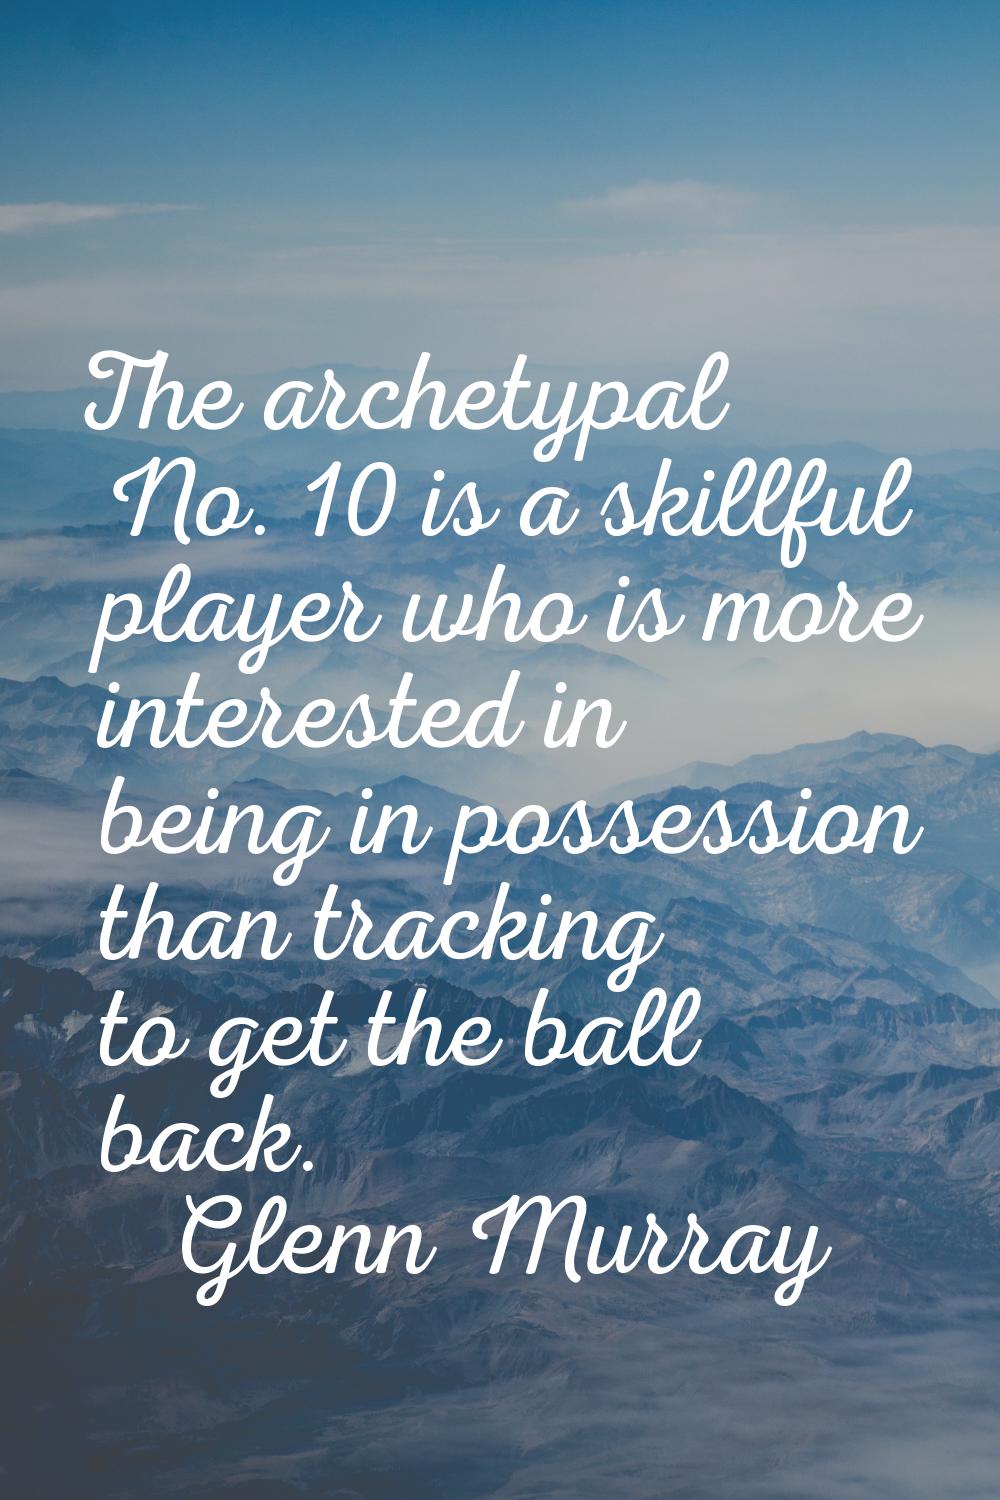 The archetypal No. 10 is a skillful player who is more interested in being in possession than track